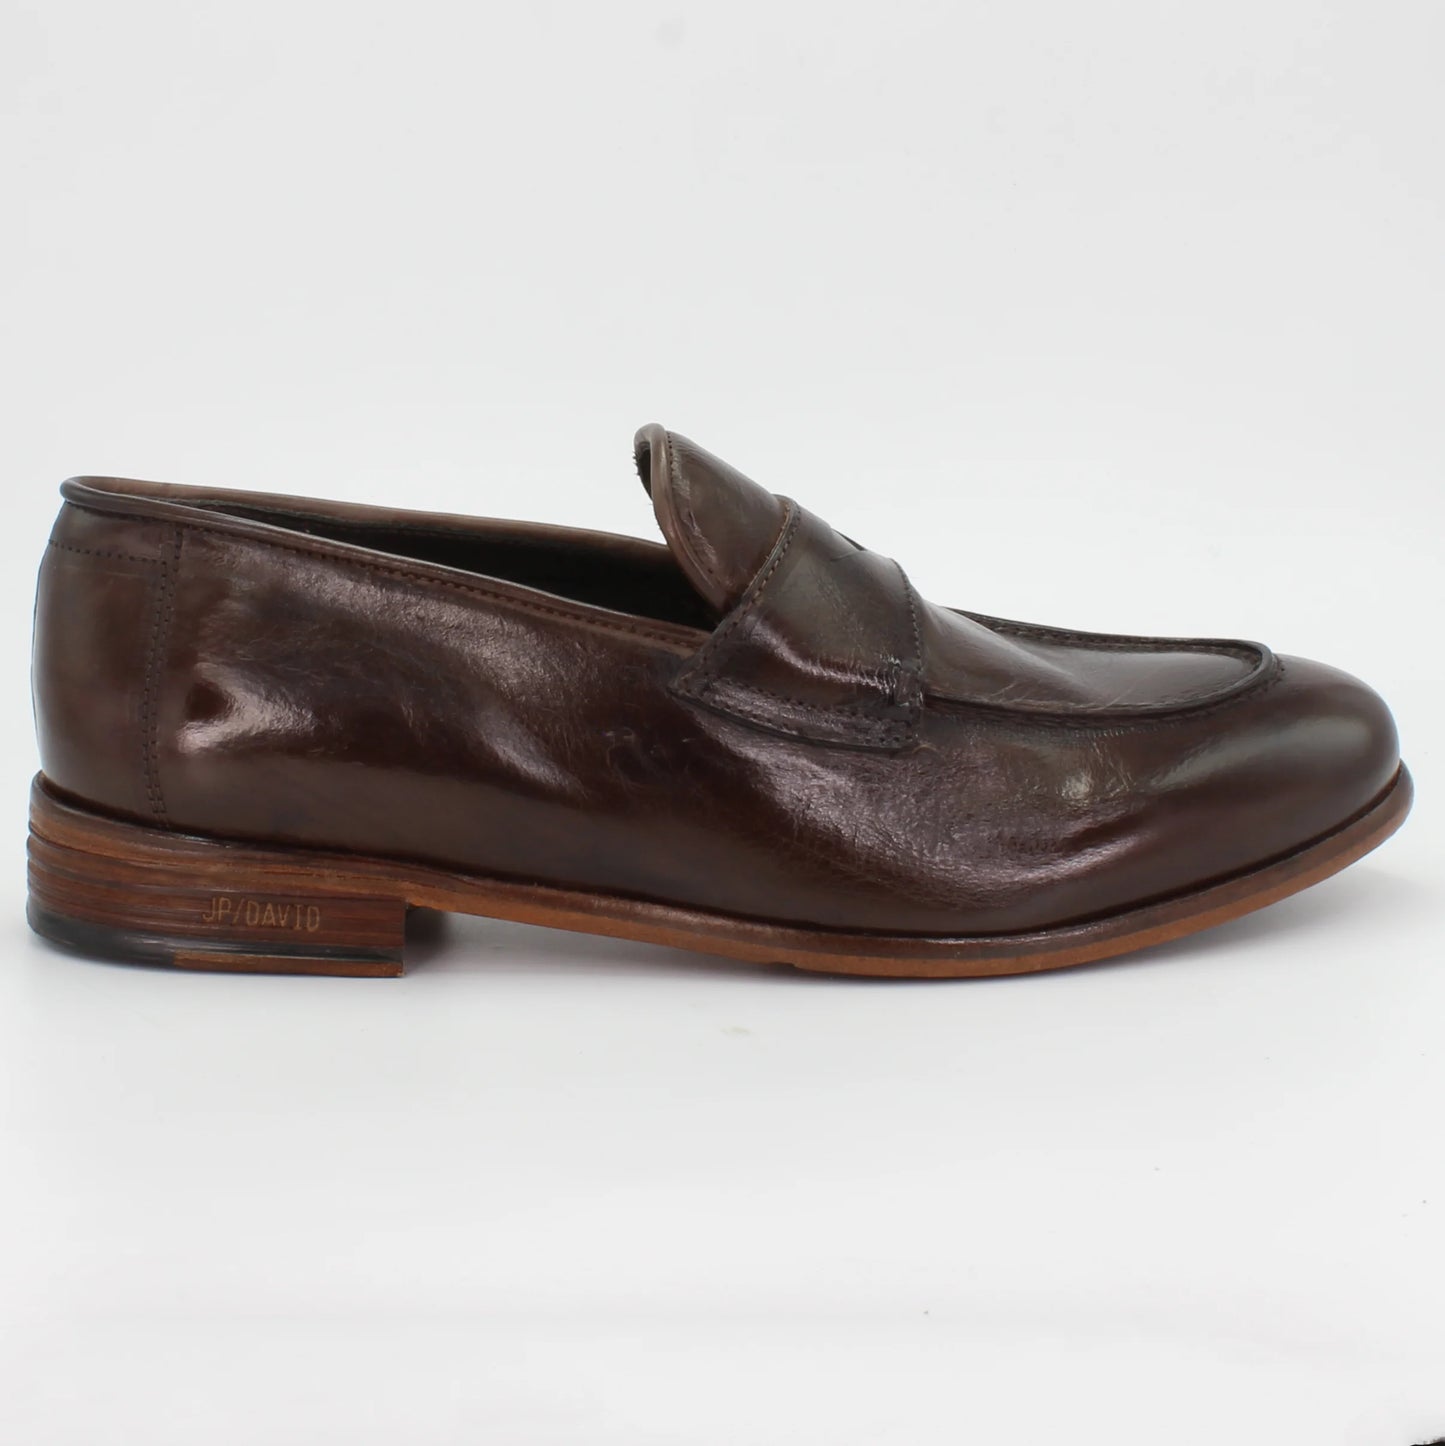 Shop Handmade Italian Leather moccasin in testa di moro (JP37012/6) or browse our range of hand-made Italian shoes for men in leather or suede in-store at Aliverti Cape Town, or shop online. We deliver in South Africa & offer multiple payment plans as well as accept multiple safe & secure payment methods.